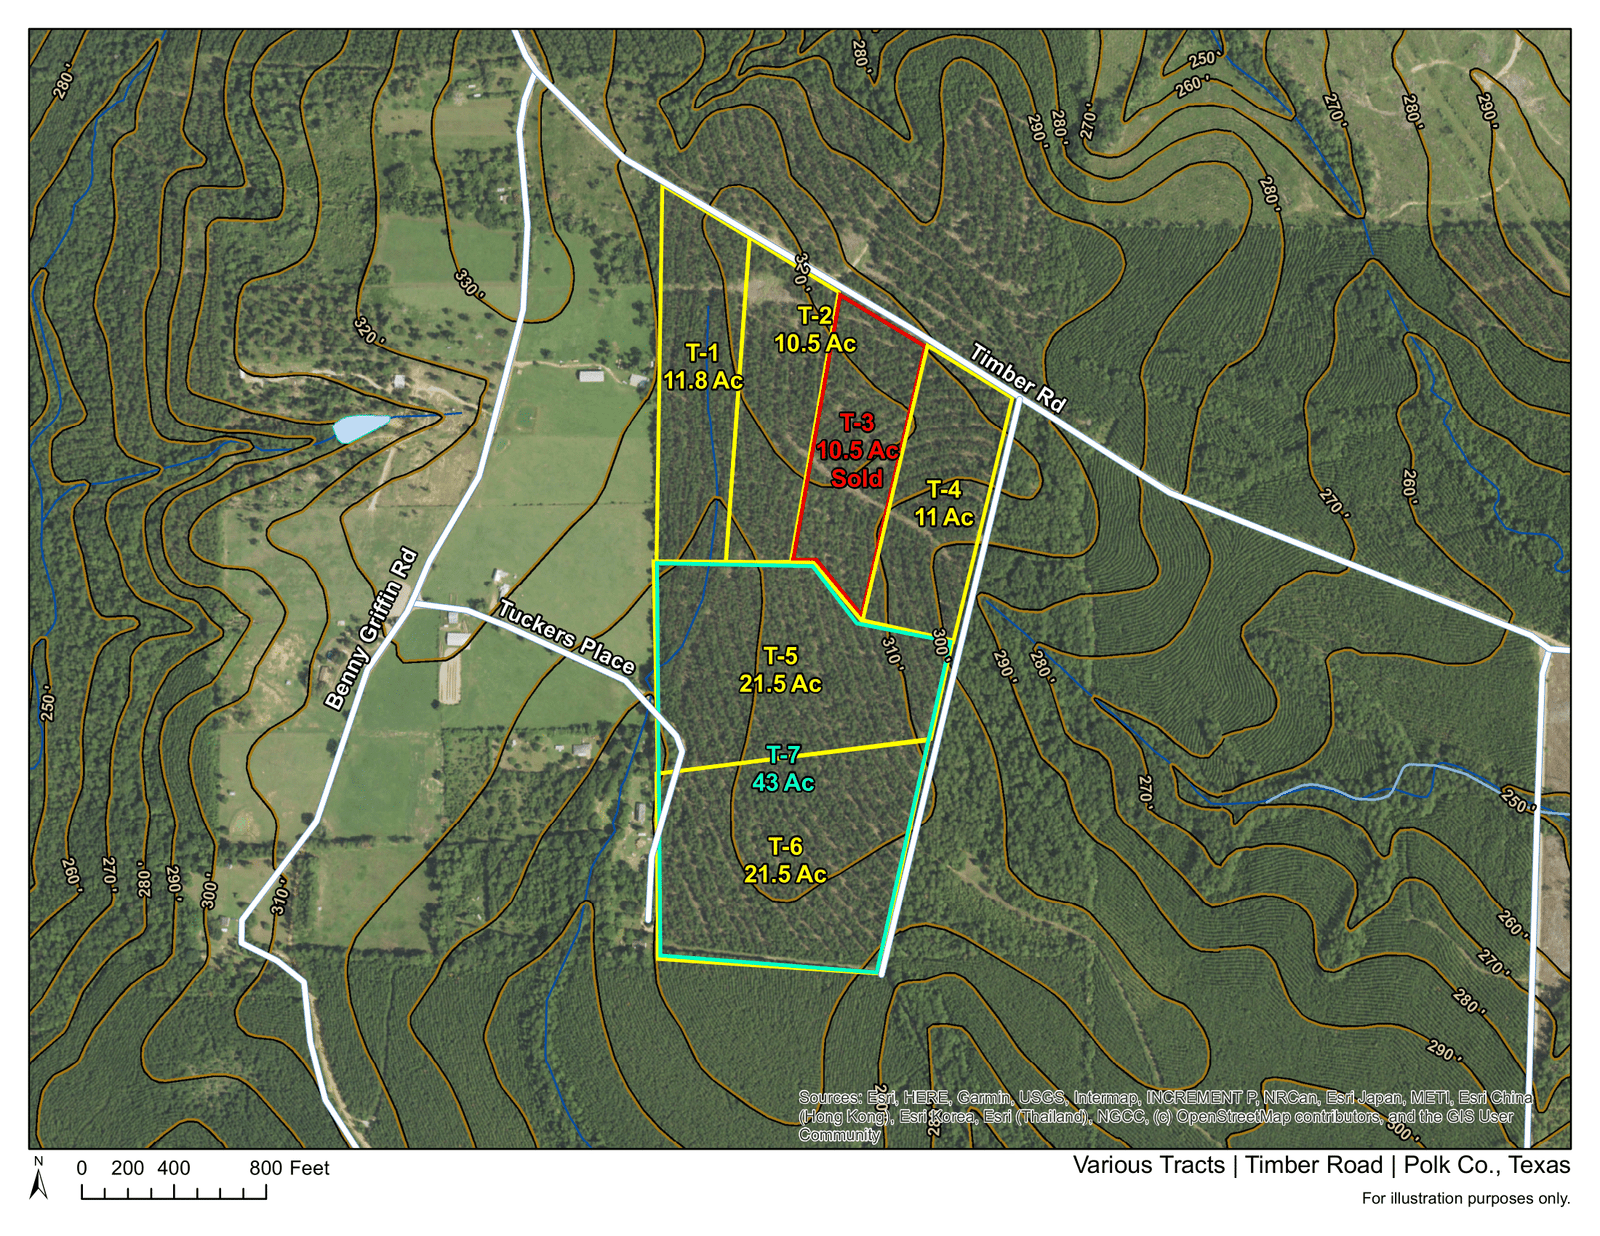 86ac-TimberRd-T1-6-Topography-1